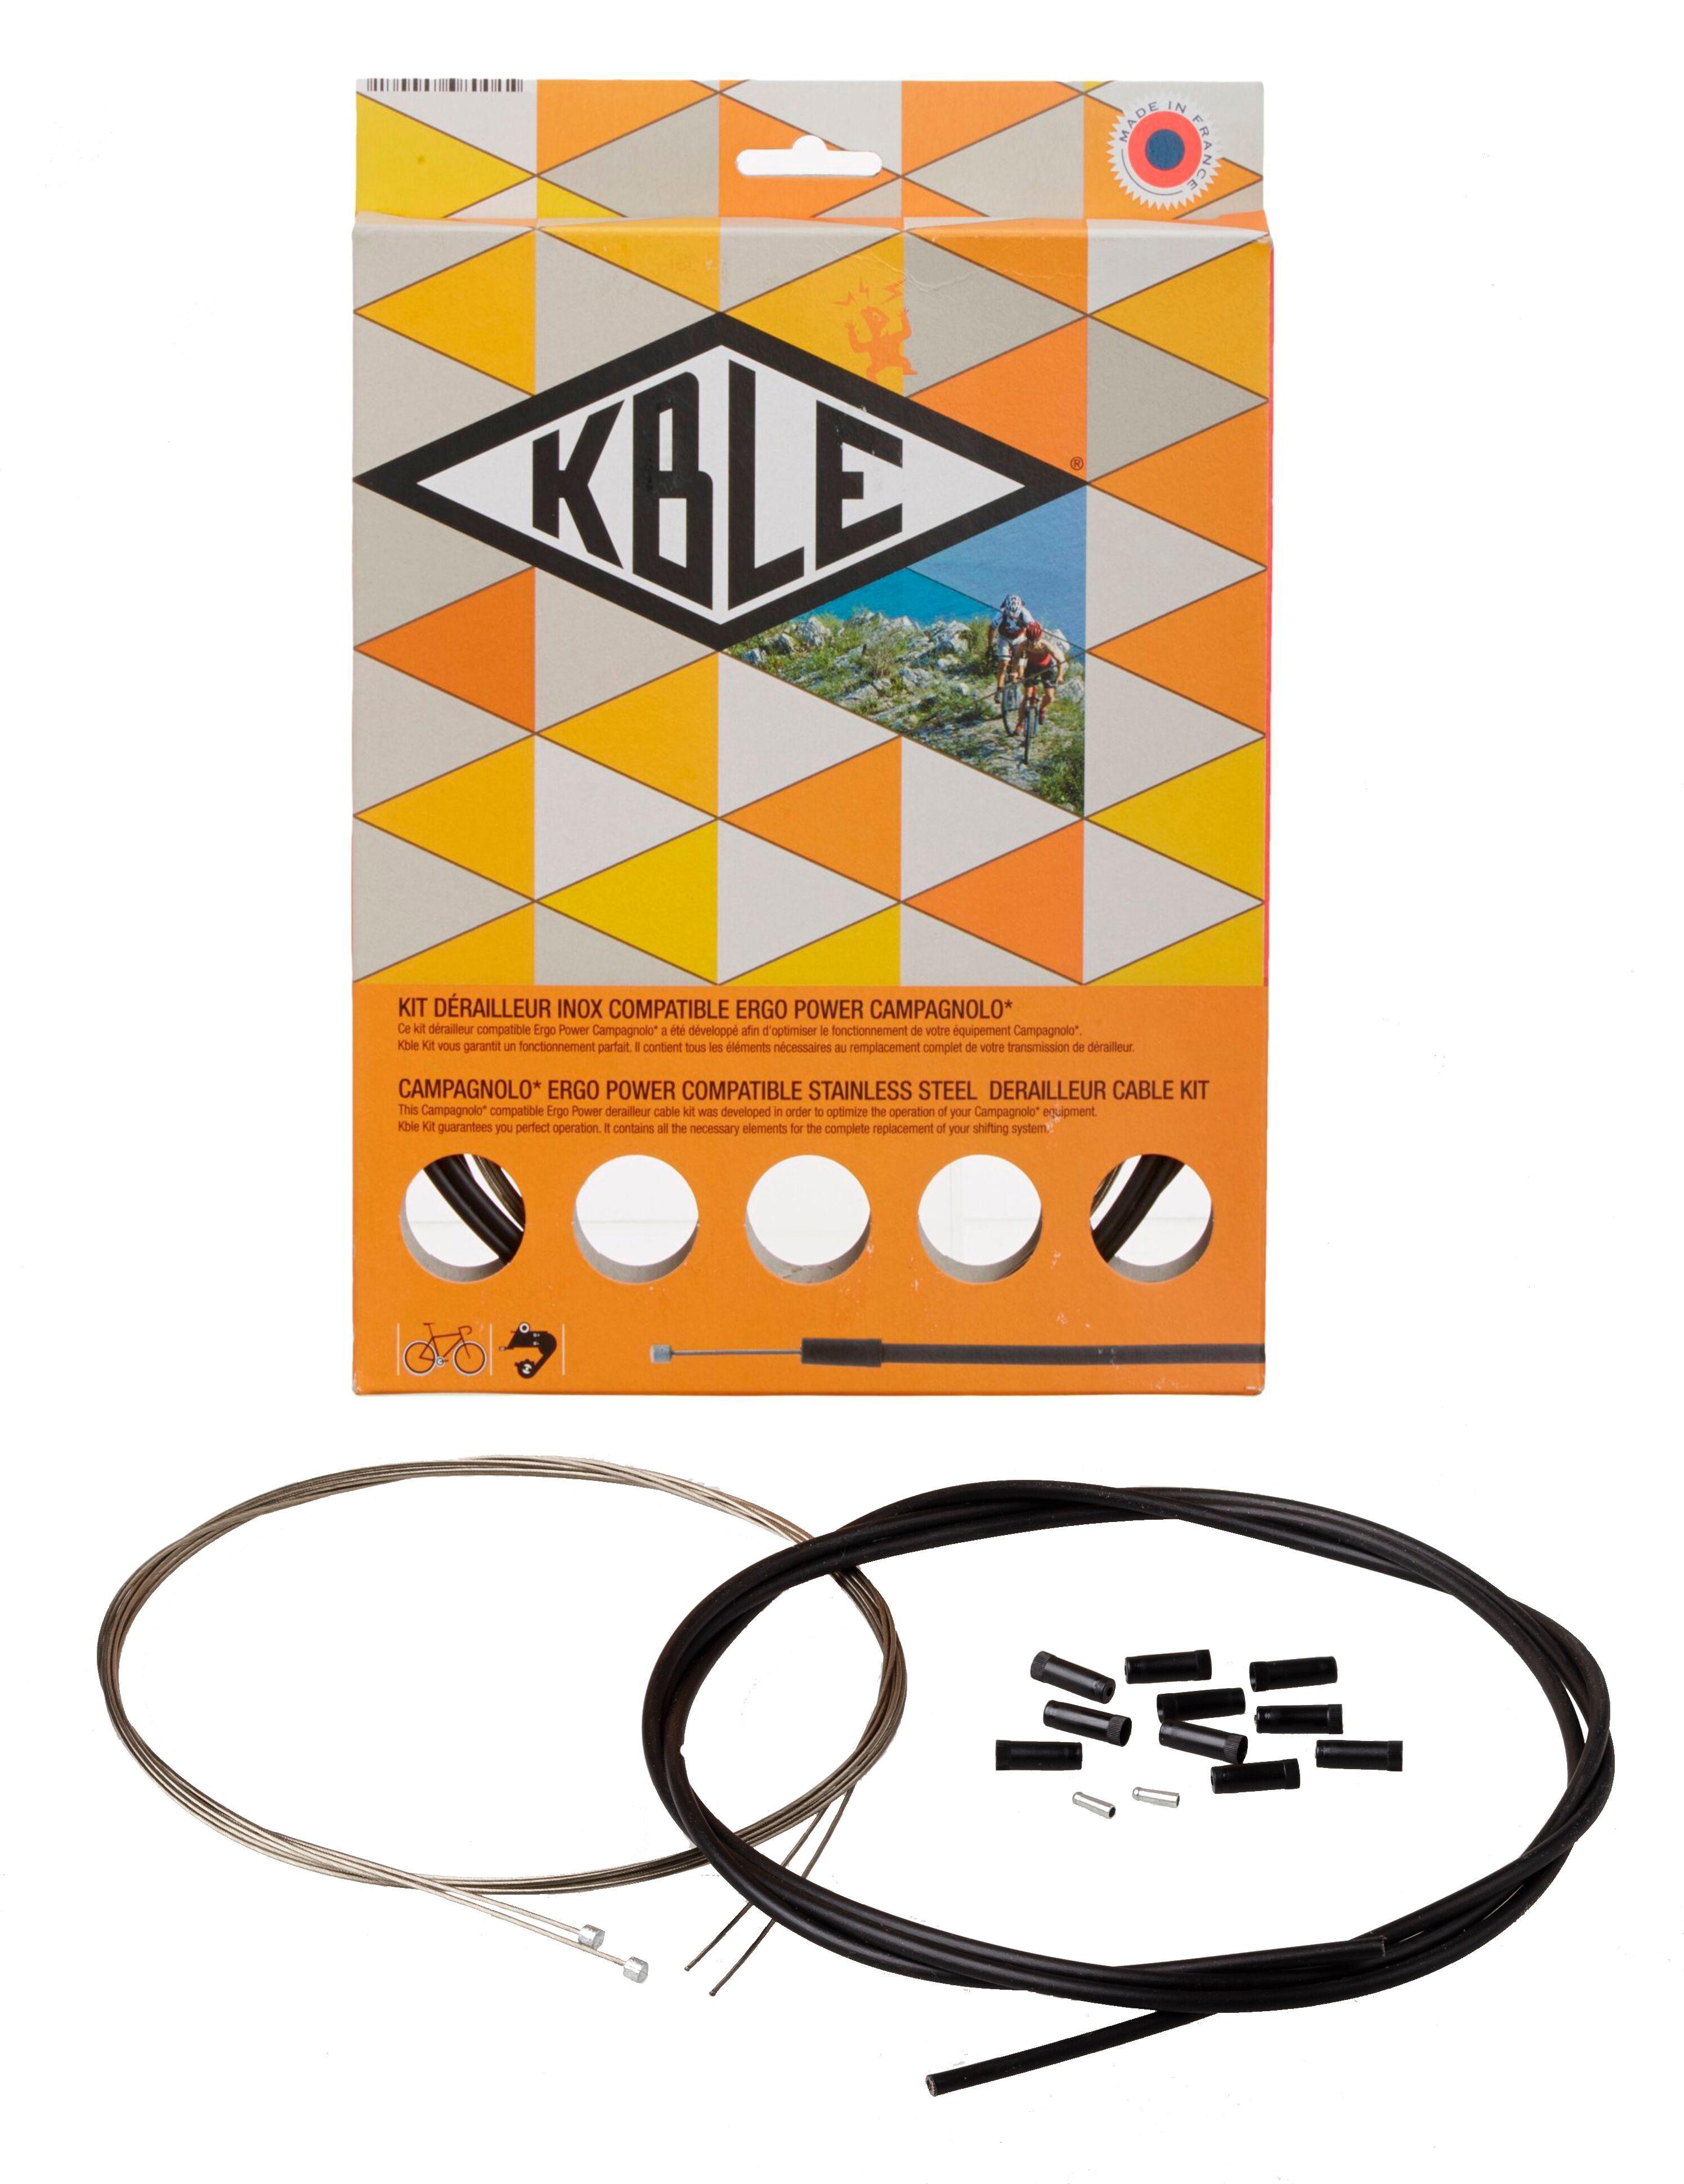 Transfil Kble Campagnolo Gear Cable Kit  Black